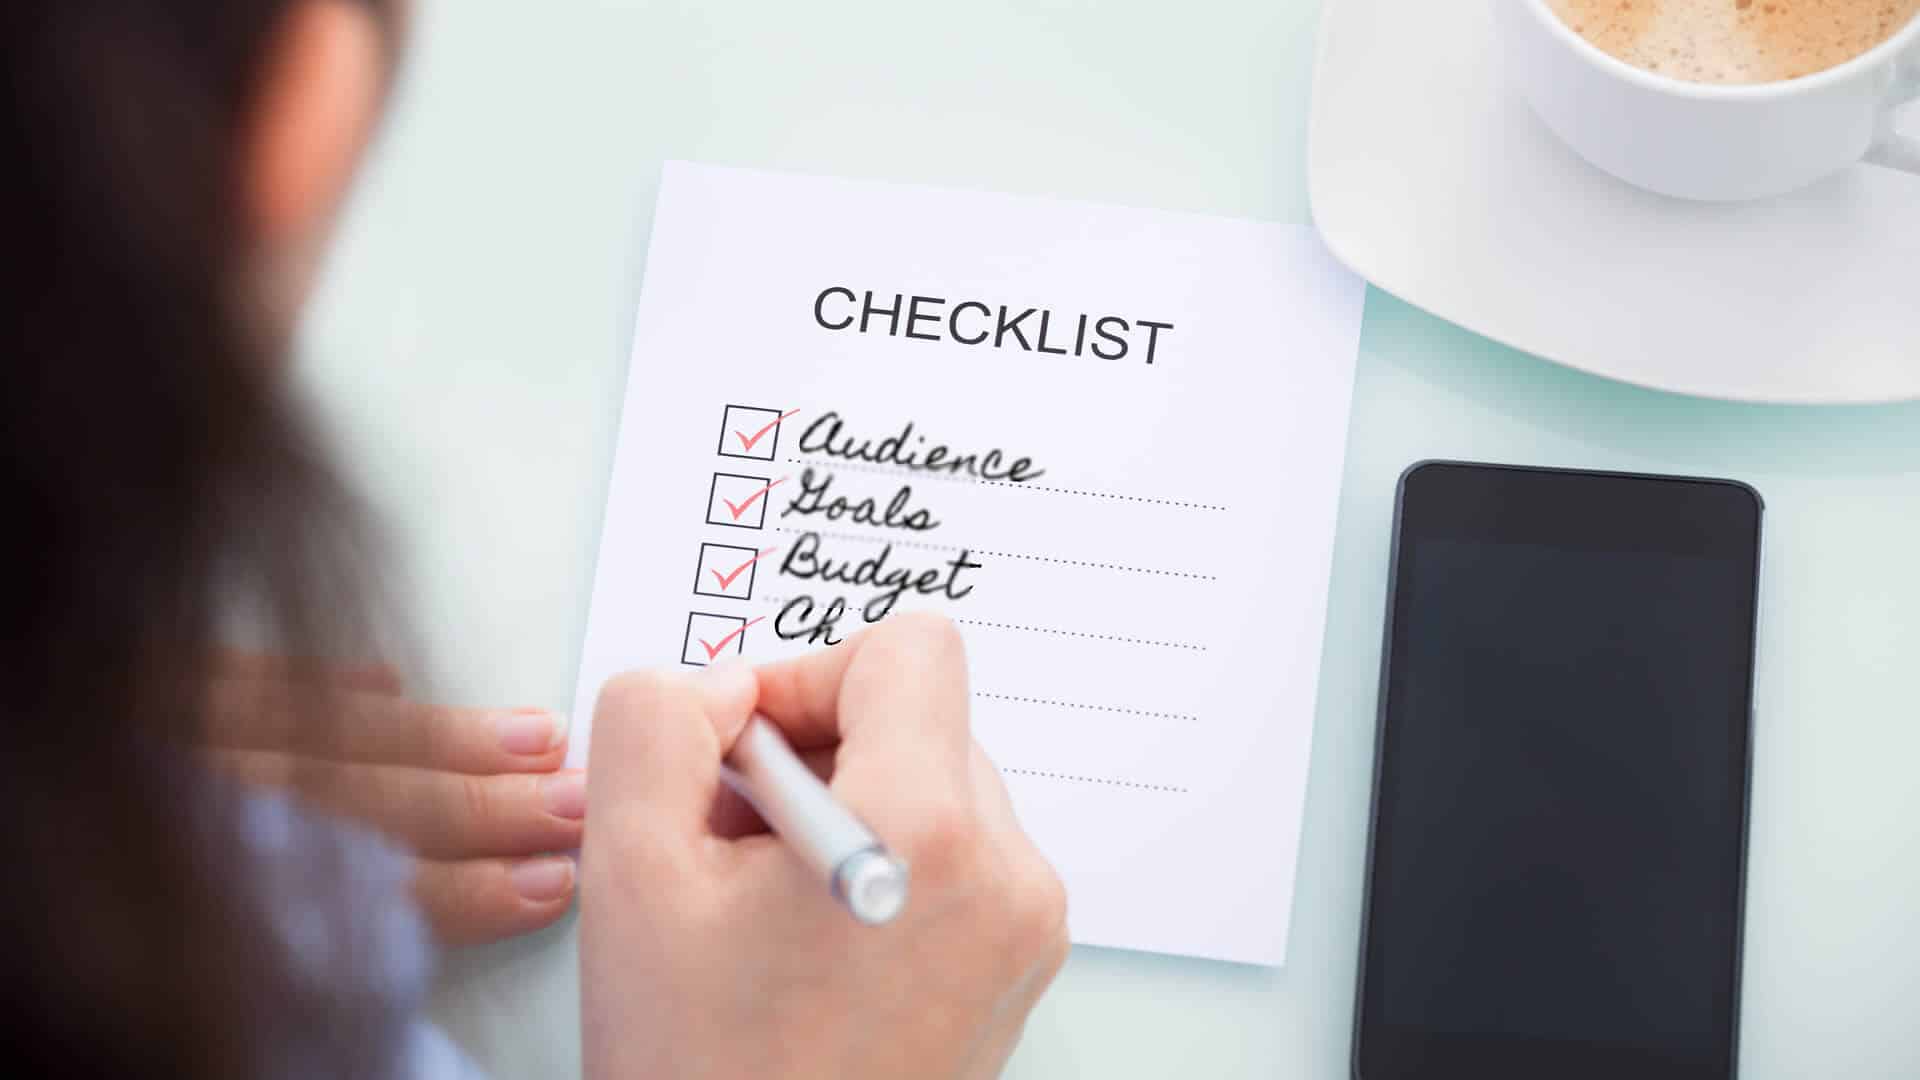 Event Planning Checklist by ZNJ Events as an Event Planner App